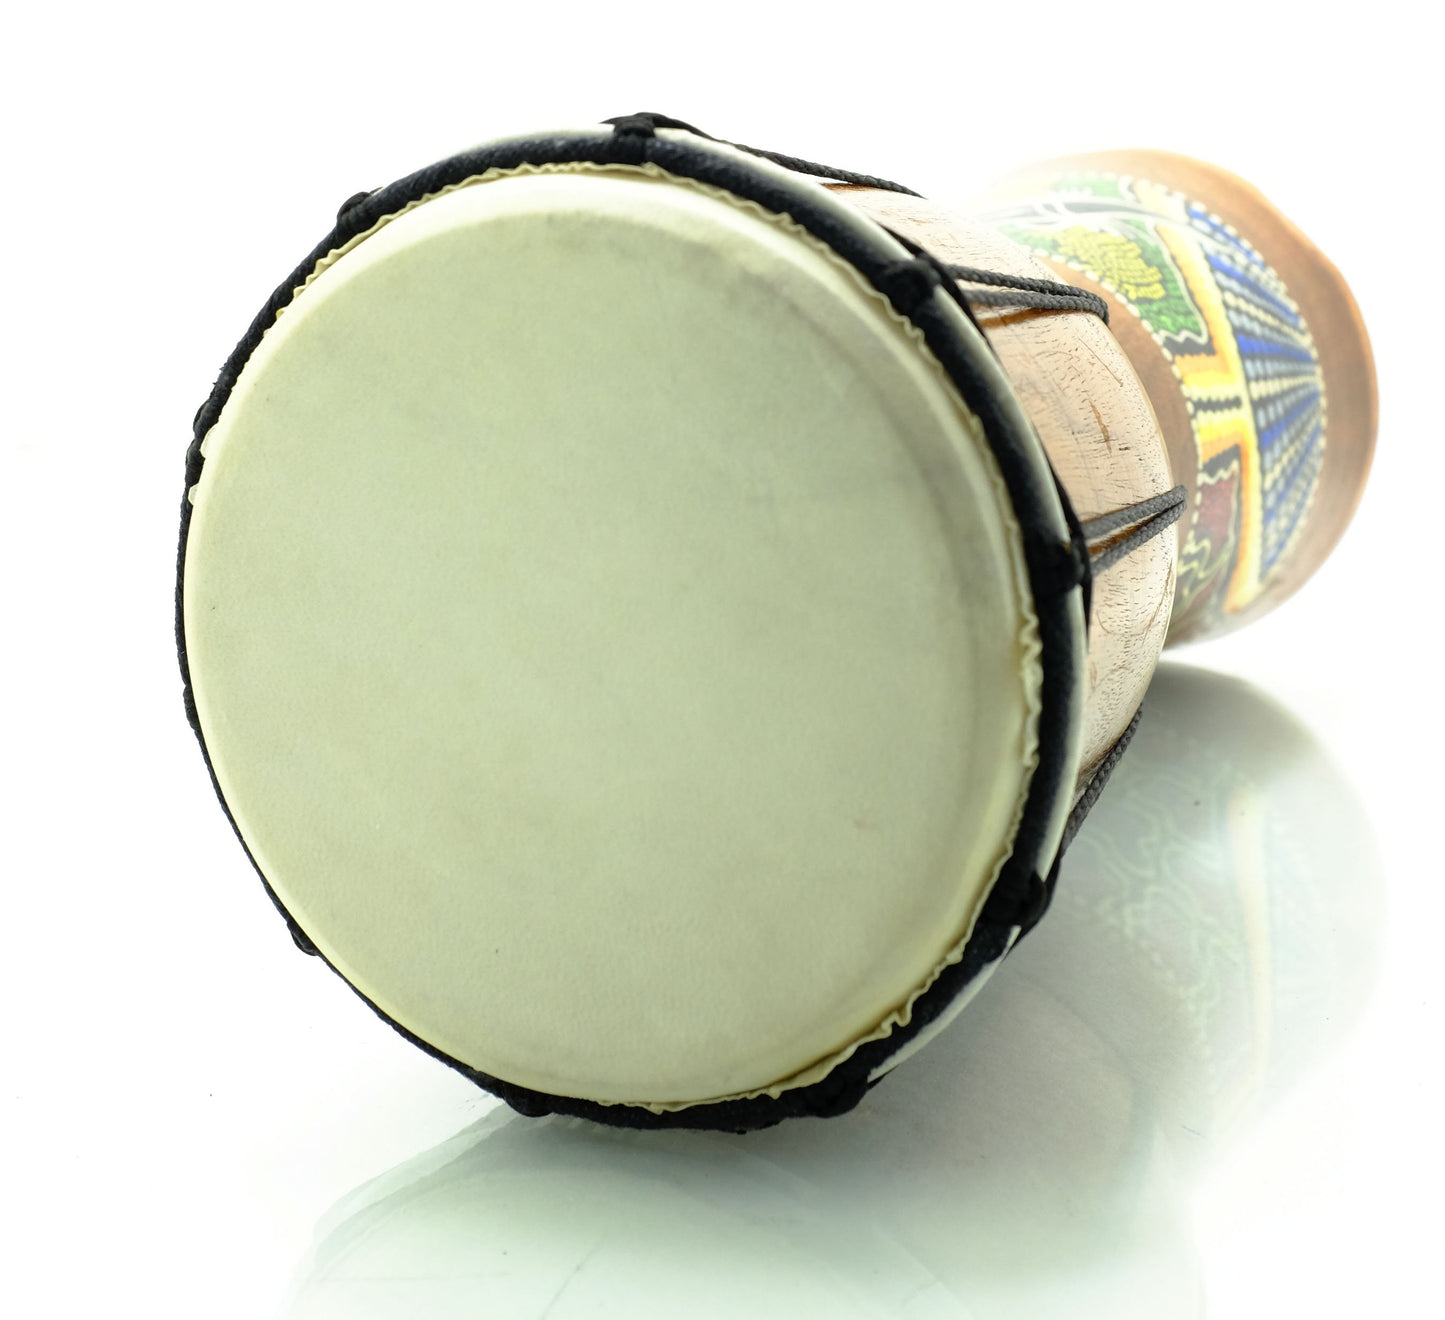 Mahogany Djembe Drums - Available in 5 Sizes